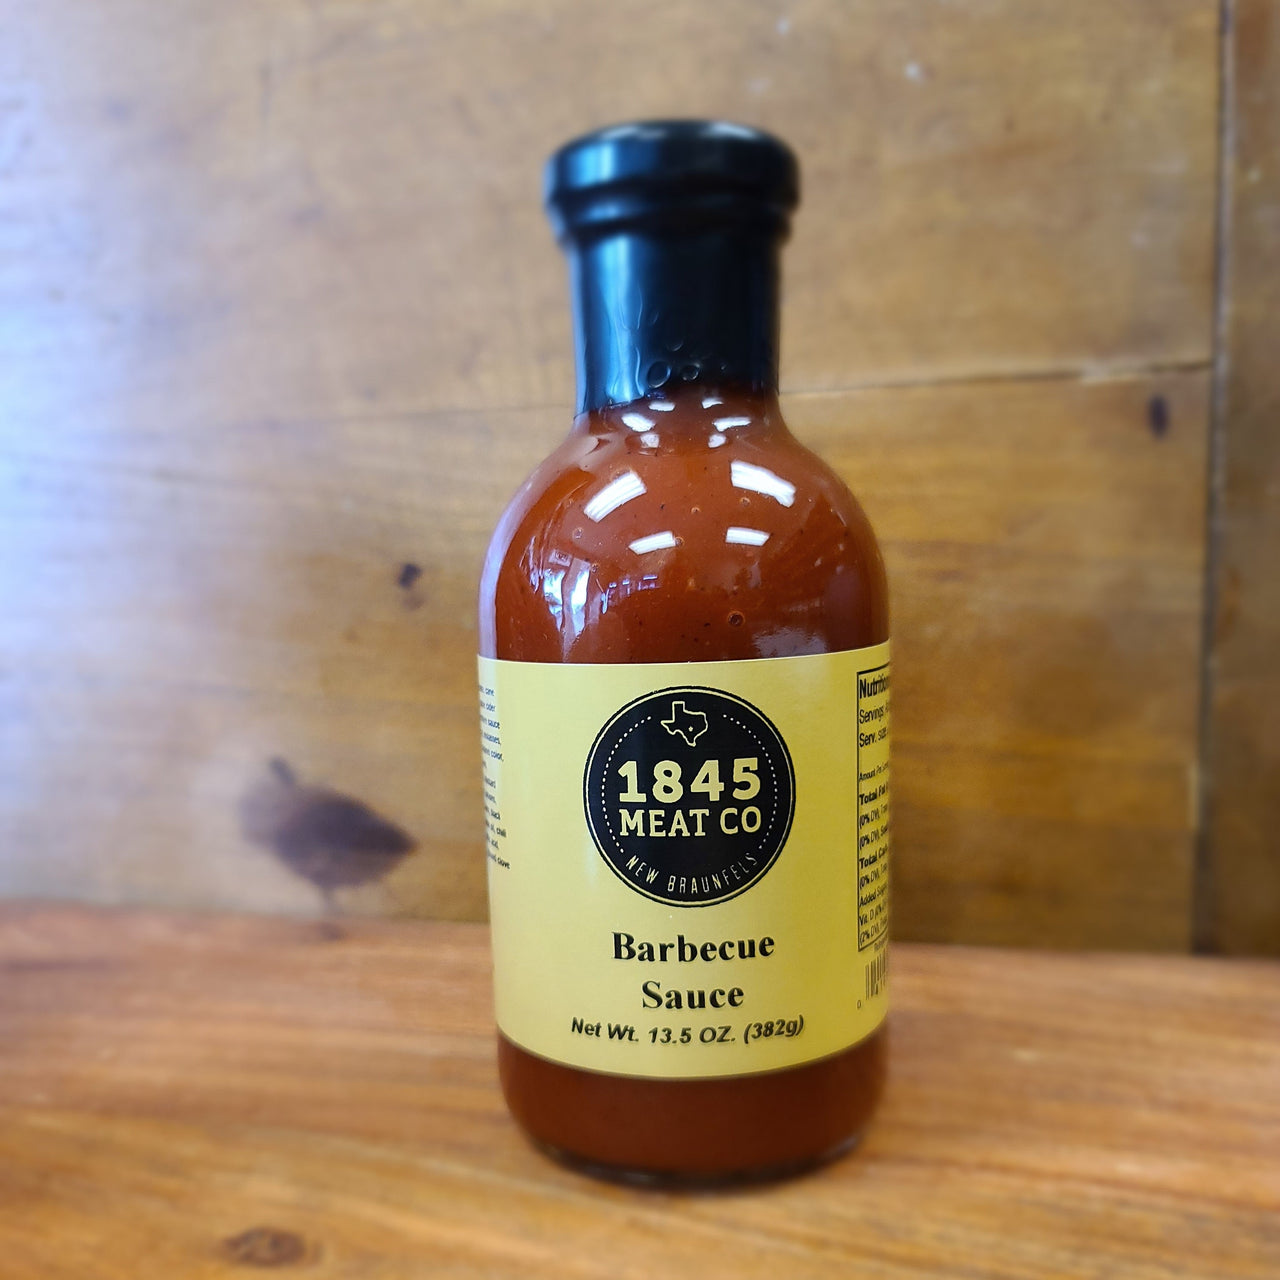 ﻿Our original BBQ Sauce is a classic that goes great with all kinds of smoked meats.